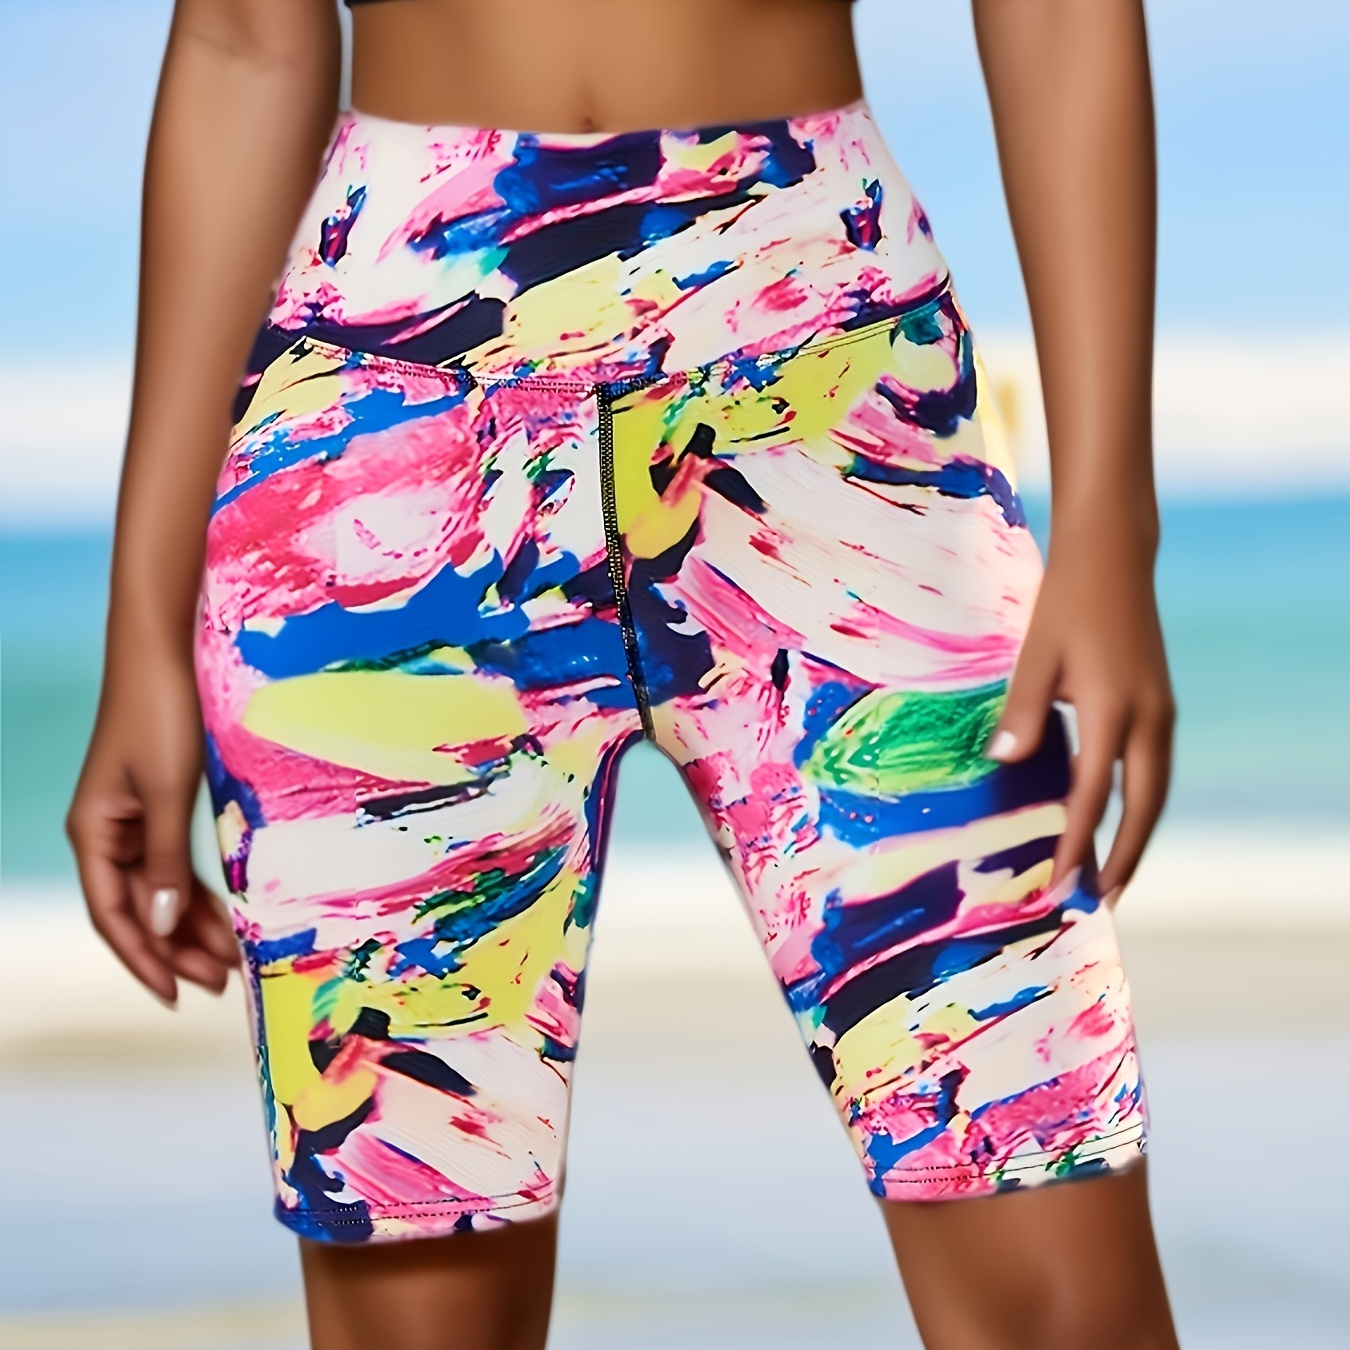 

Colorful Printed High Waist Running Yoga Shorts, Stretchy Tummy Control Butt Lifting Fitness Shorts, Women's Activewear